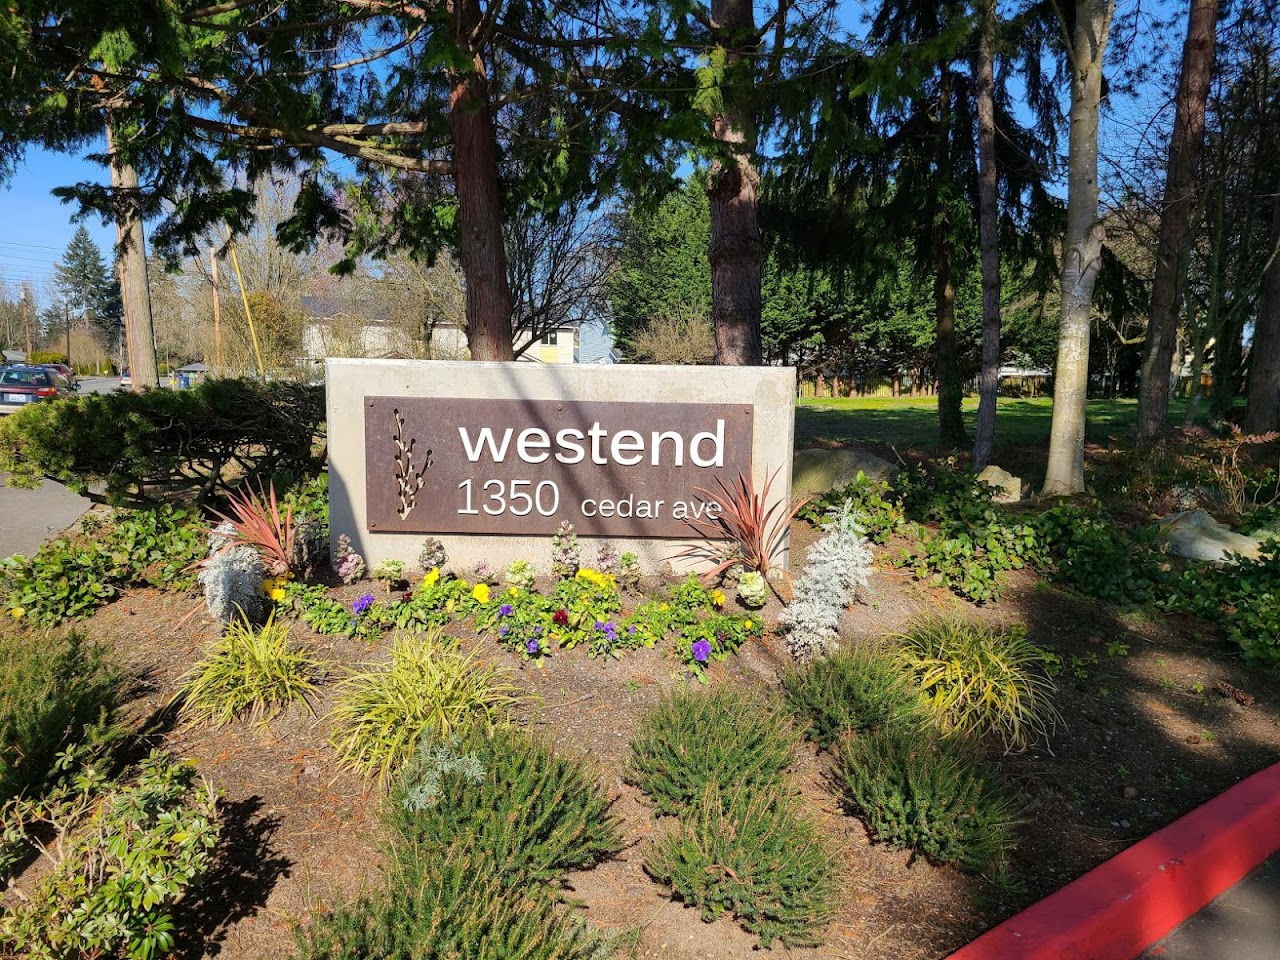 Photo of WESTEND APARTMENTS. Affordable housing located at 1350 CEDAR AVE MARYSVILLE, WA 98270